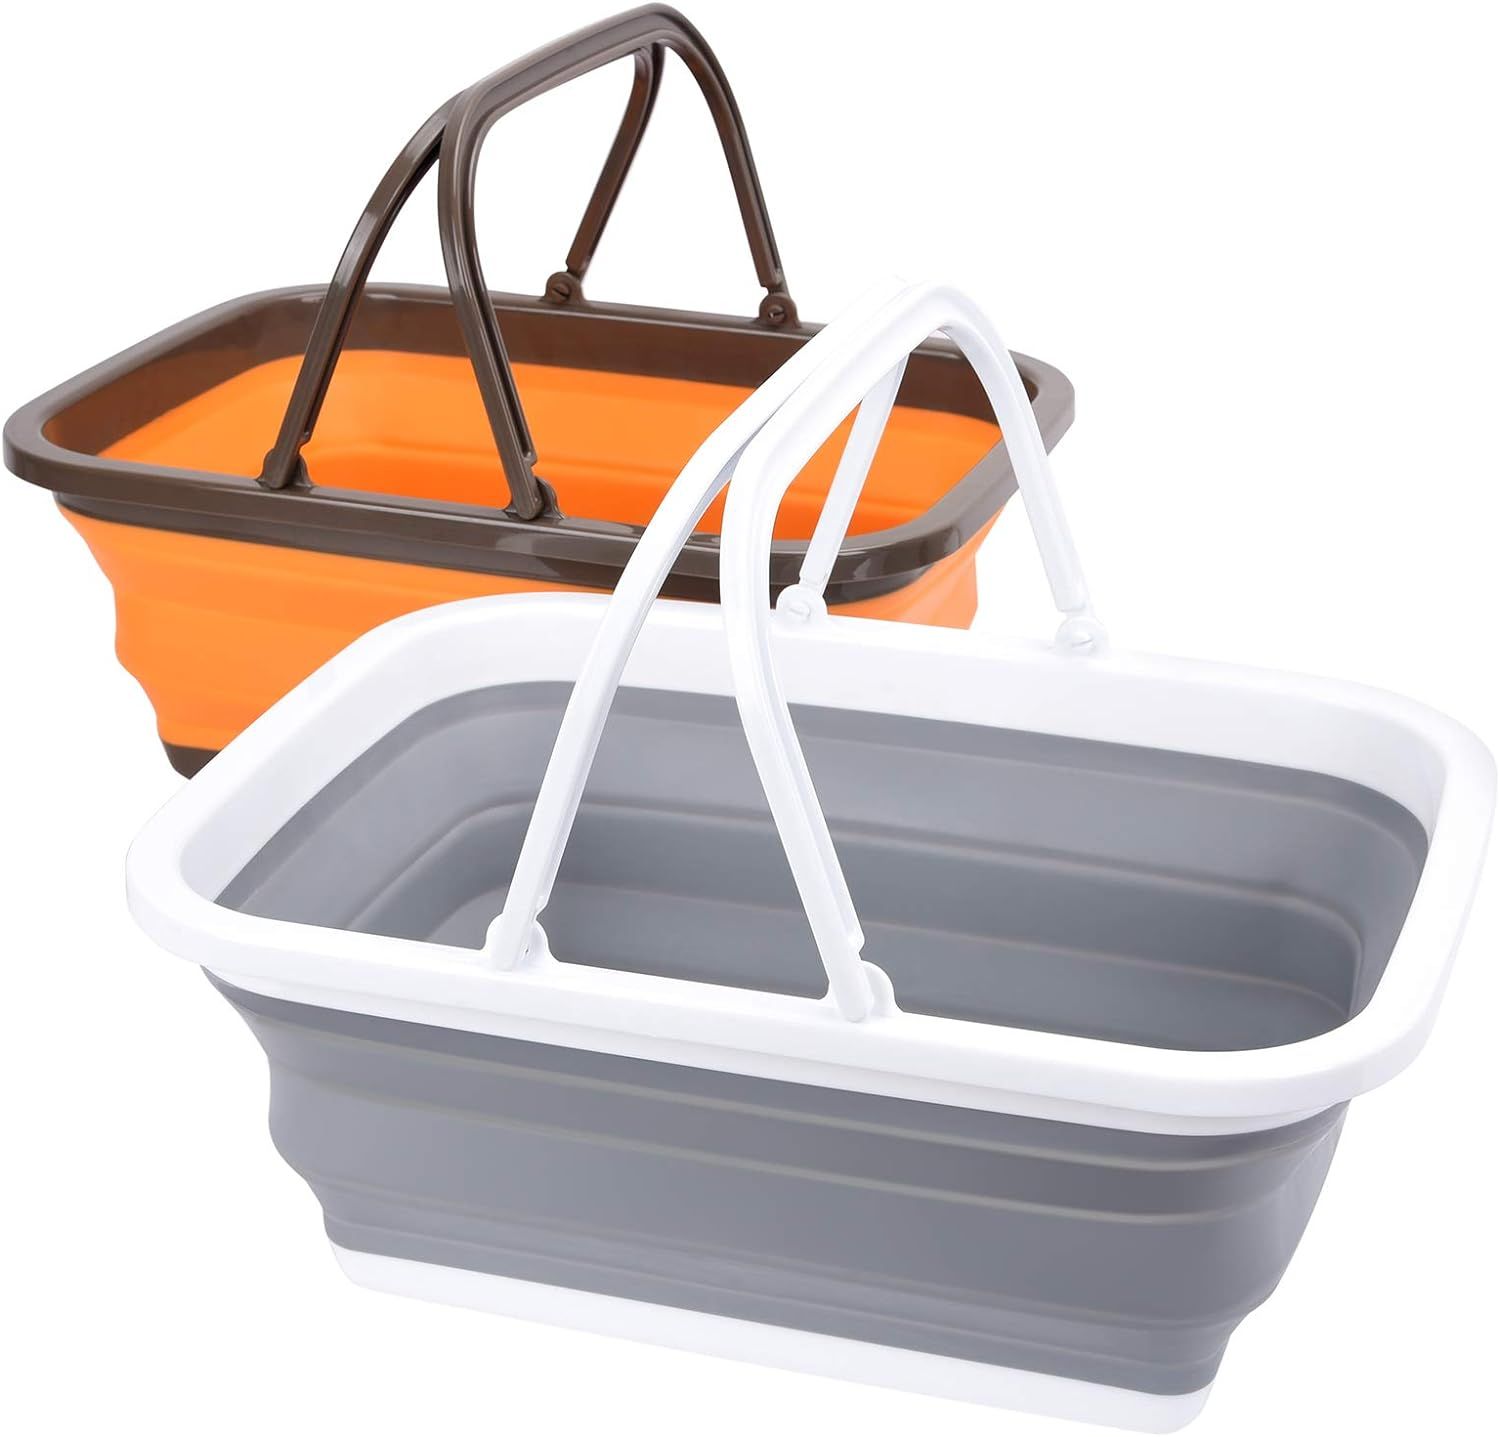 Magesh Collapsible Sink 2 Pack - Outdoor Camping Picnic Basket Each 11L/2.90Gal Wash Basin, Portable | Amazon (US)